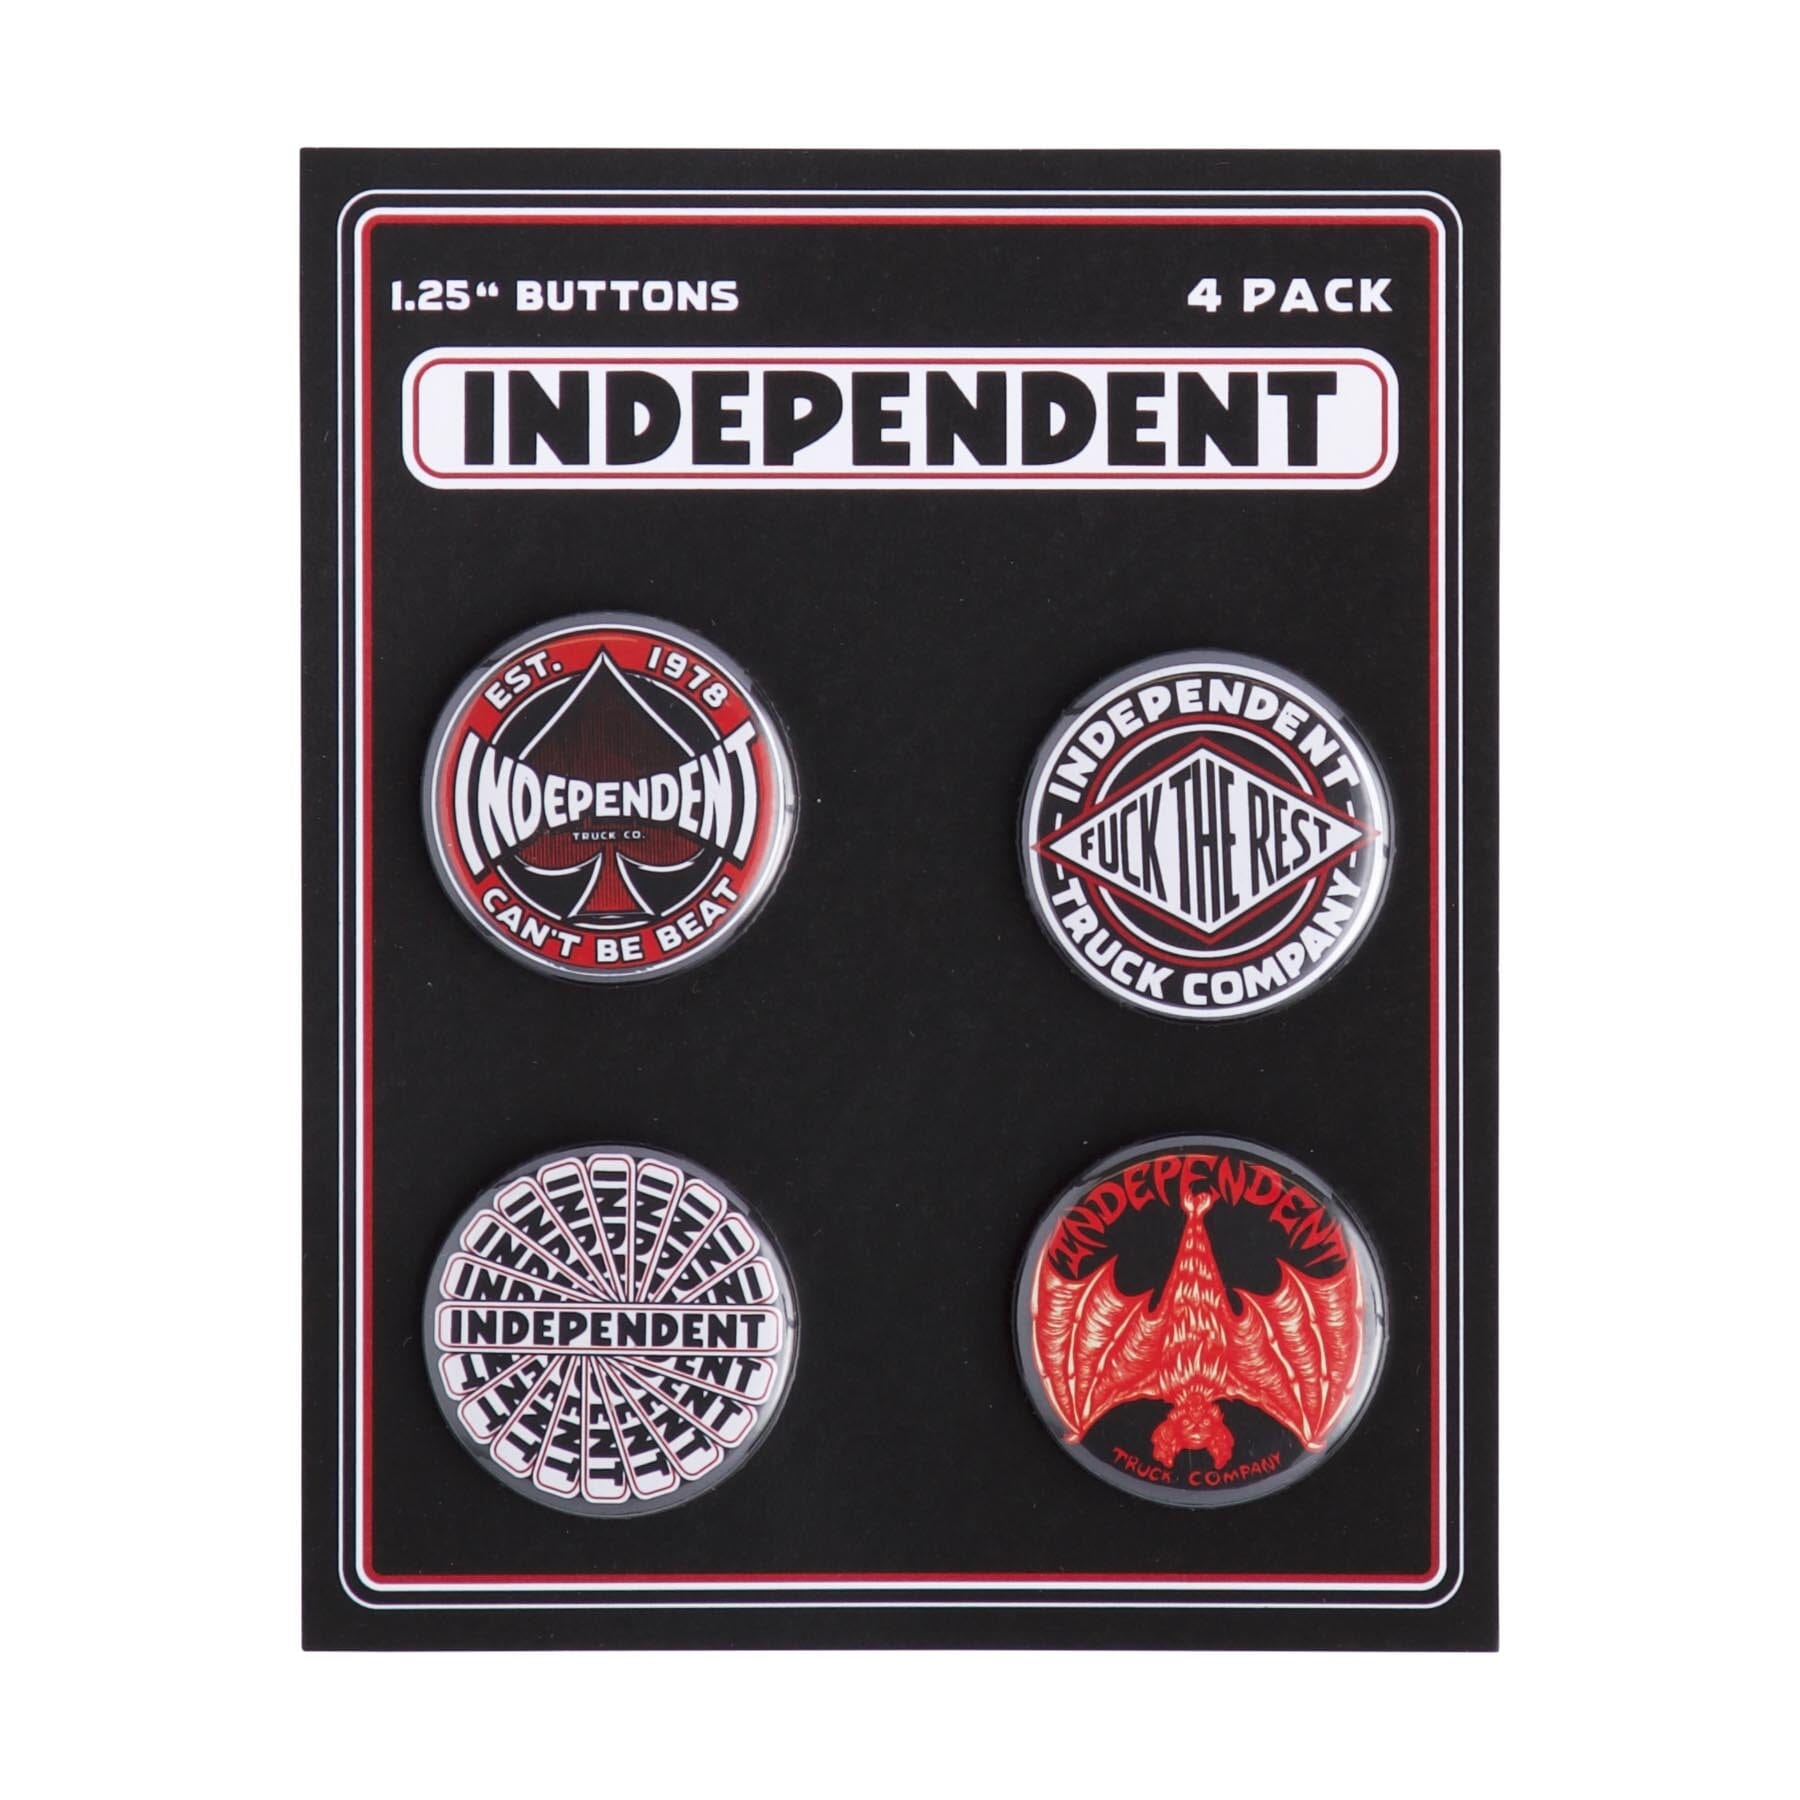 Independent Array 4 Pack Button Pin Set Black/Red accessories Independent 